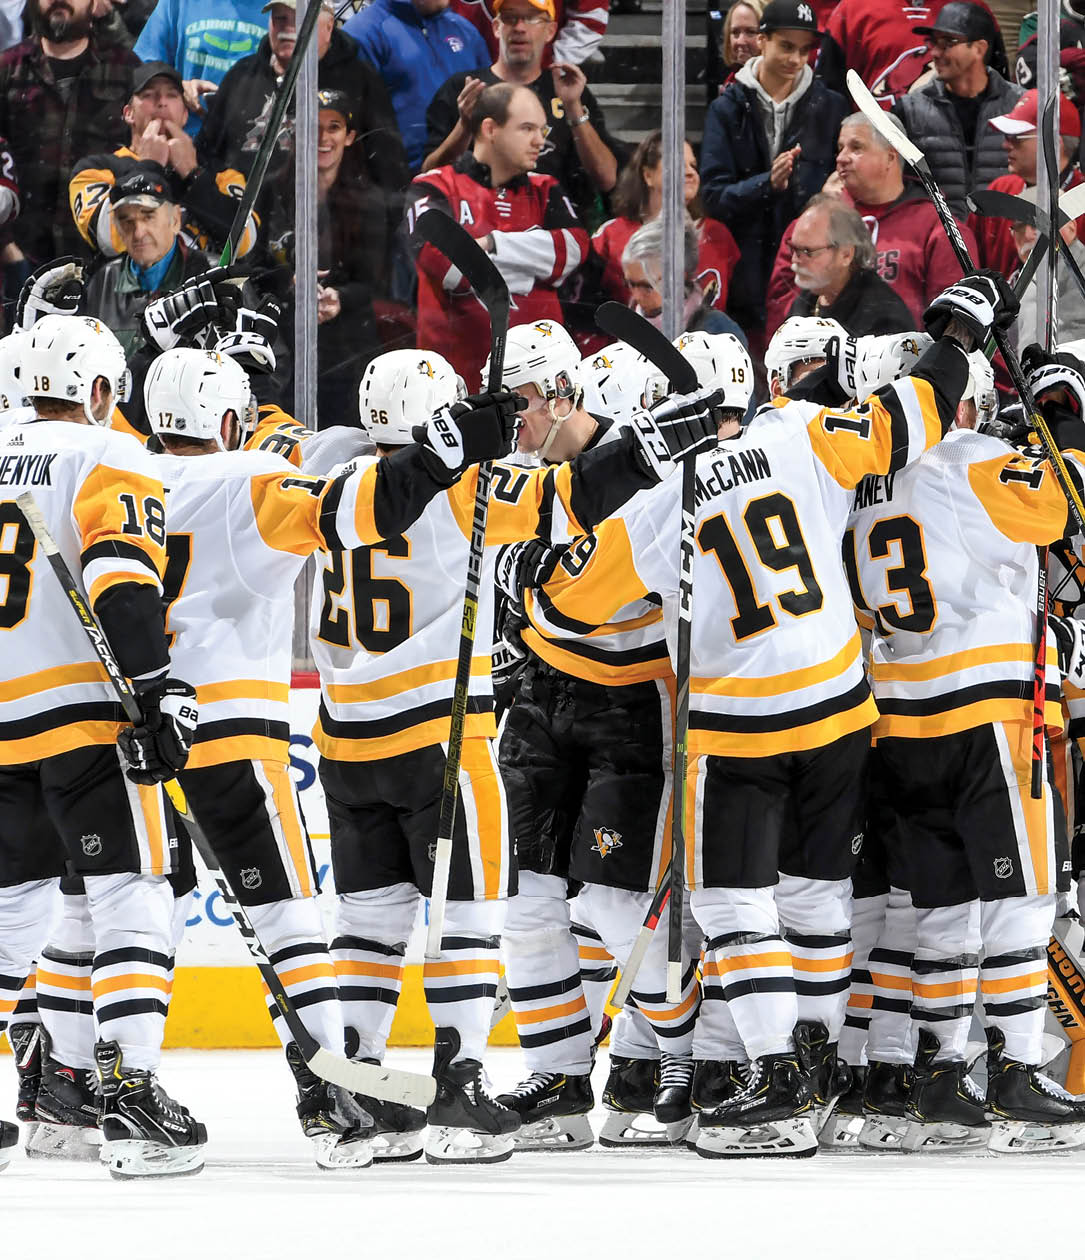 GLENDALE, ARIZONA - JANUARY 12: Goalie Tristian Jarry #35 of the Pittsburgh Penguins is surrounded by teammates as they celebrate a 4-3 shootout victory against the Arizona Coyotes during the NHL hockey game at Gila River Arena on January 12, 2020 in Glendale, Arizona  (Photo by Norm Hall NHLI via Getty Images)